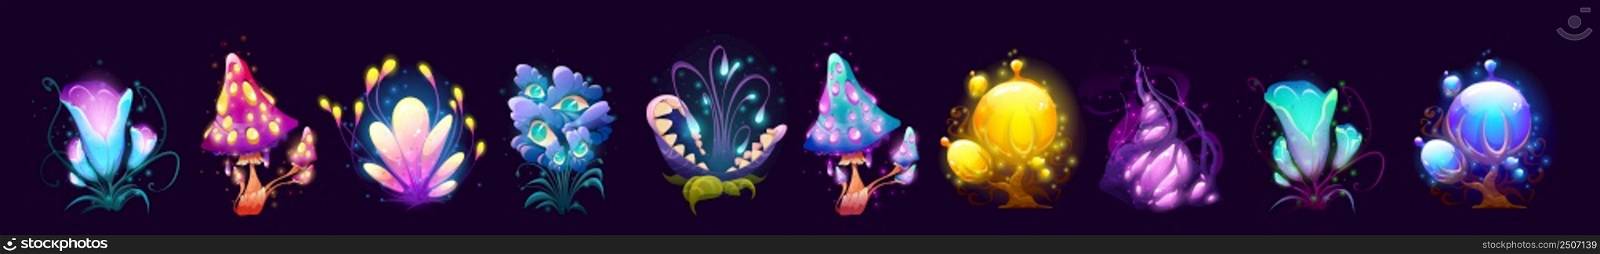 Fantasy mushrooms, flowers and trees, alien planet or magic game plants isolated set. Unusual nature flora or fauna assets, strange fairy tale or extraterrestrial elements, Cartoon vector illustration. Fantasy mushrooms, flowers and trees, alien flora